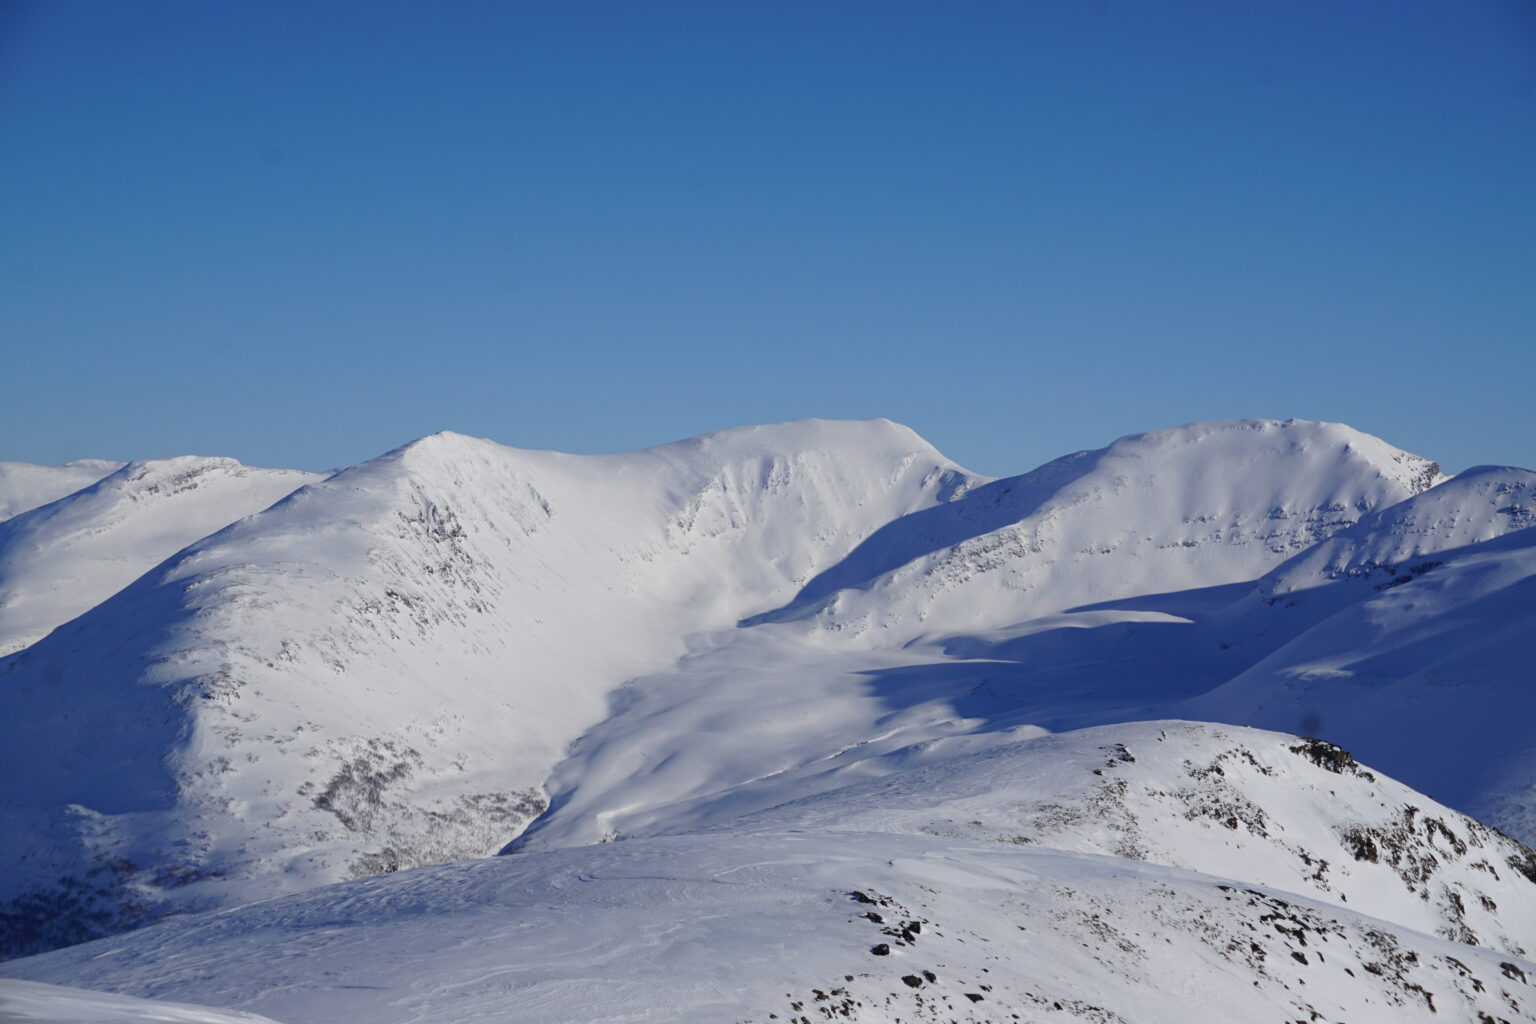 Looking towards the Tamok husset backcountry from the summit of Sjufjellet